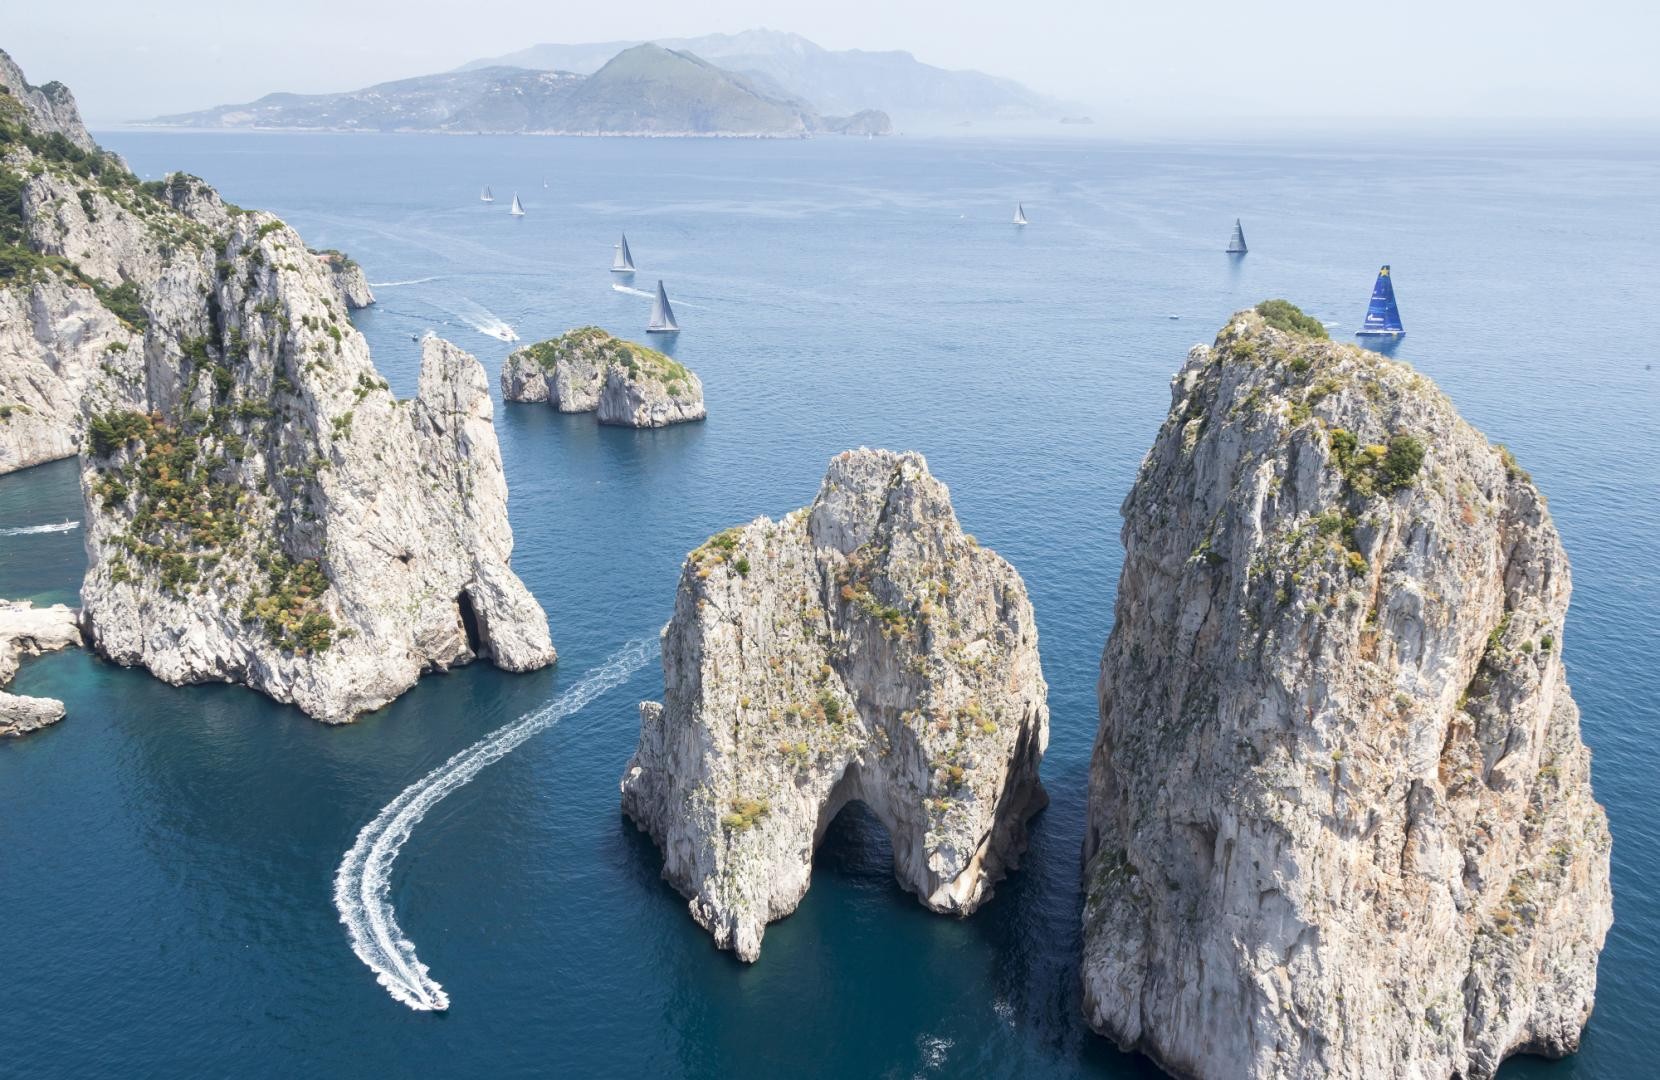 Capri is renowned for its impressive geology such as these 'faraglioni'. Photo: ROLEX / Carlo Borlenghi